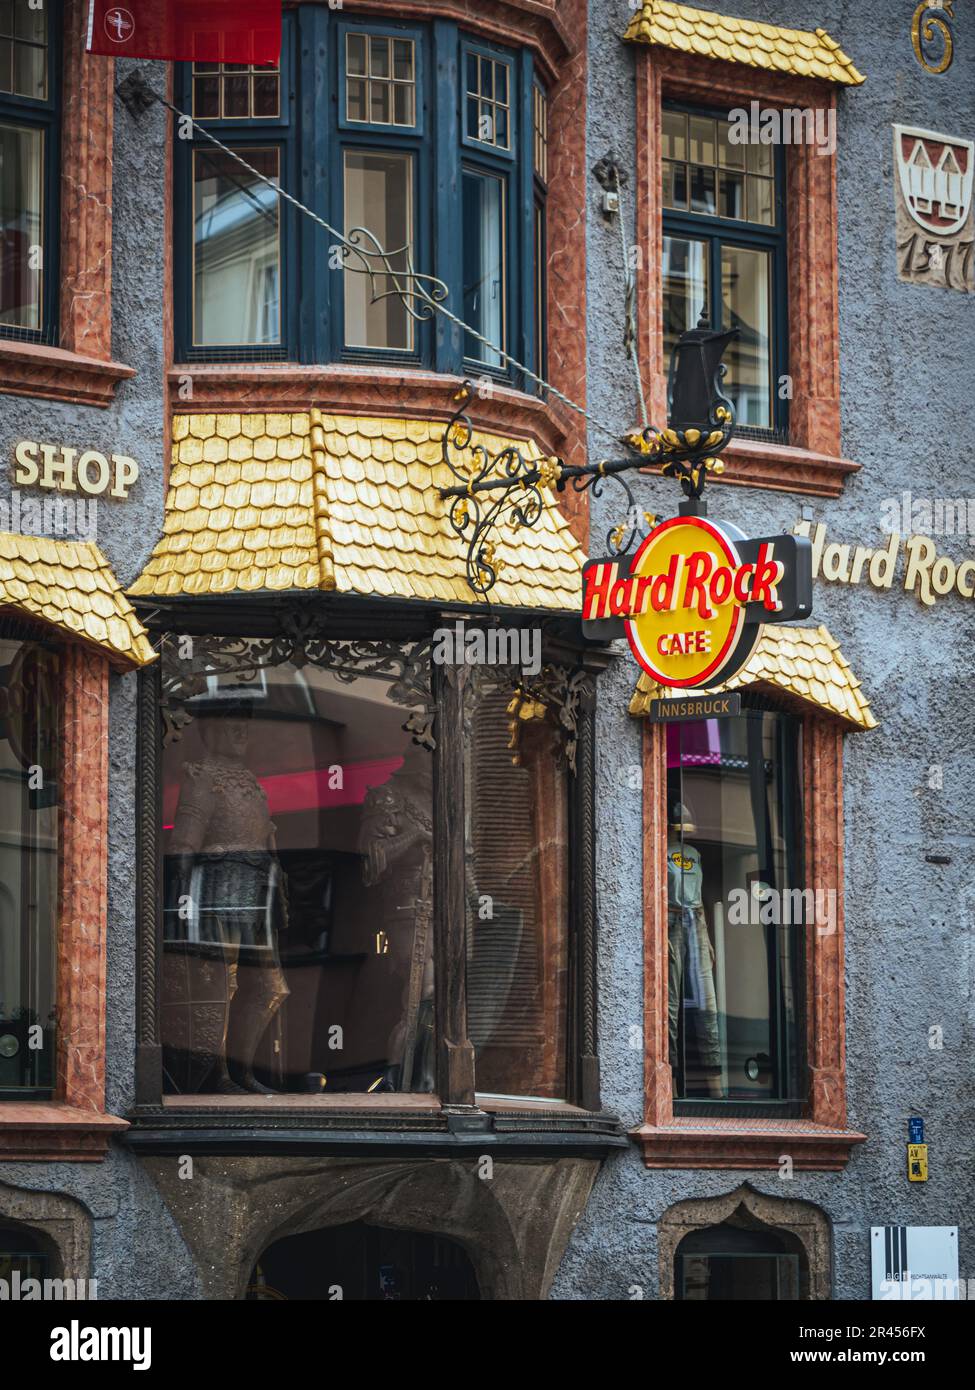 Hard Rock Cafe sign in Innsbruck, Tyrol, Austria old town Stock Photo